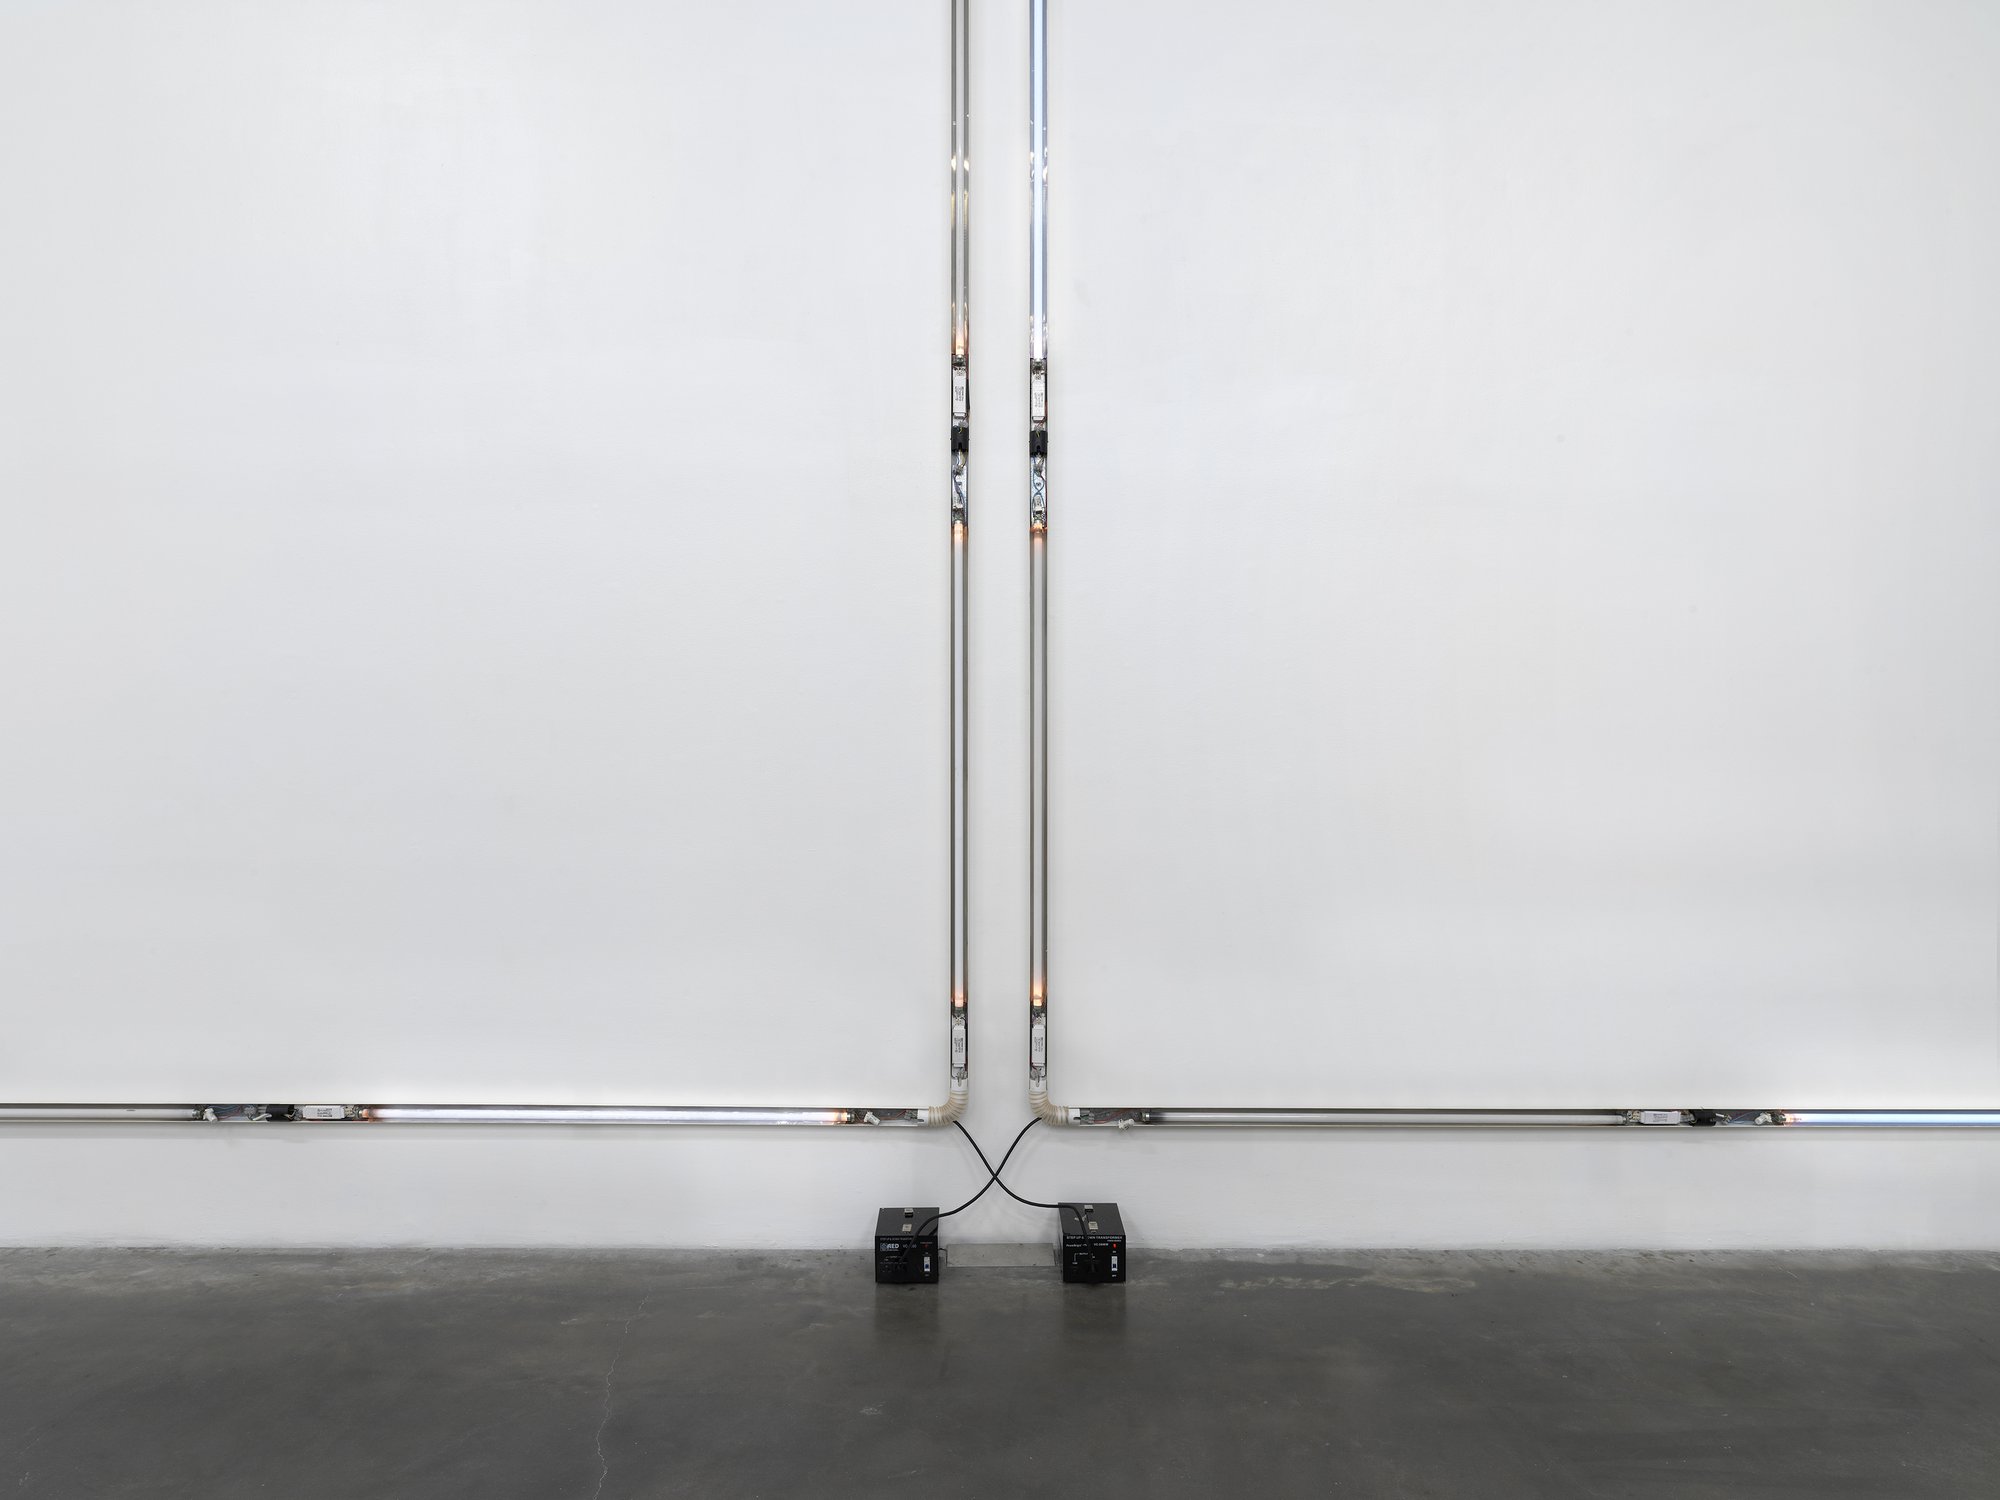 Iris Touliatou, untitled (still not over you), 2019/2021/X, ceiling light fixtures acquired from defunct offices in Athens, aluminium frame, fluorescents, wires, cable, transformers, 420 x 420 x 8 cm each (165 3/8 x 165 3/8 x 3 1/8 in each), 2021.Installation view, New Museum Triennial, Soft Water Hard Stone, New Museum, New York, 2021.